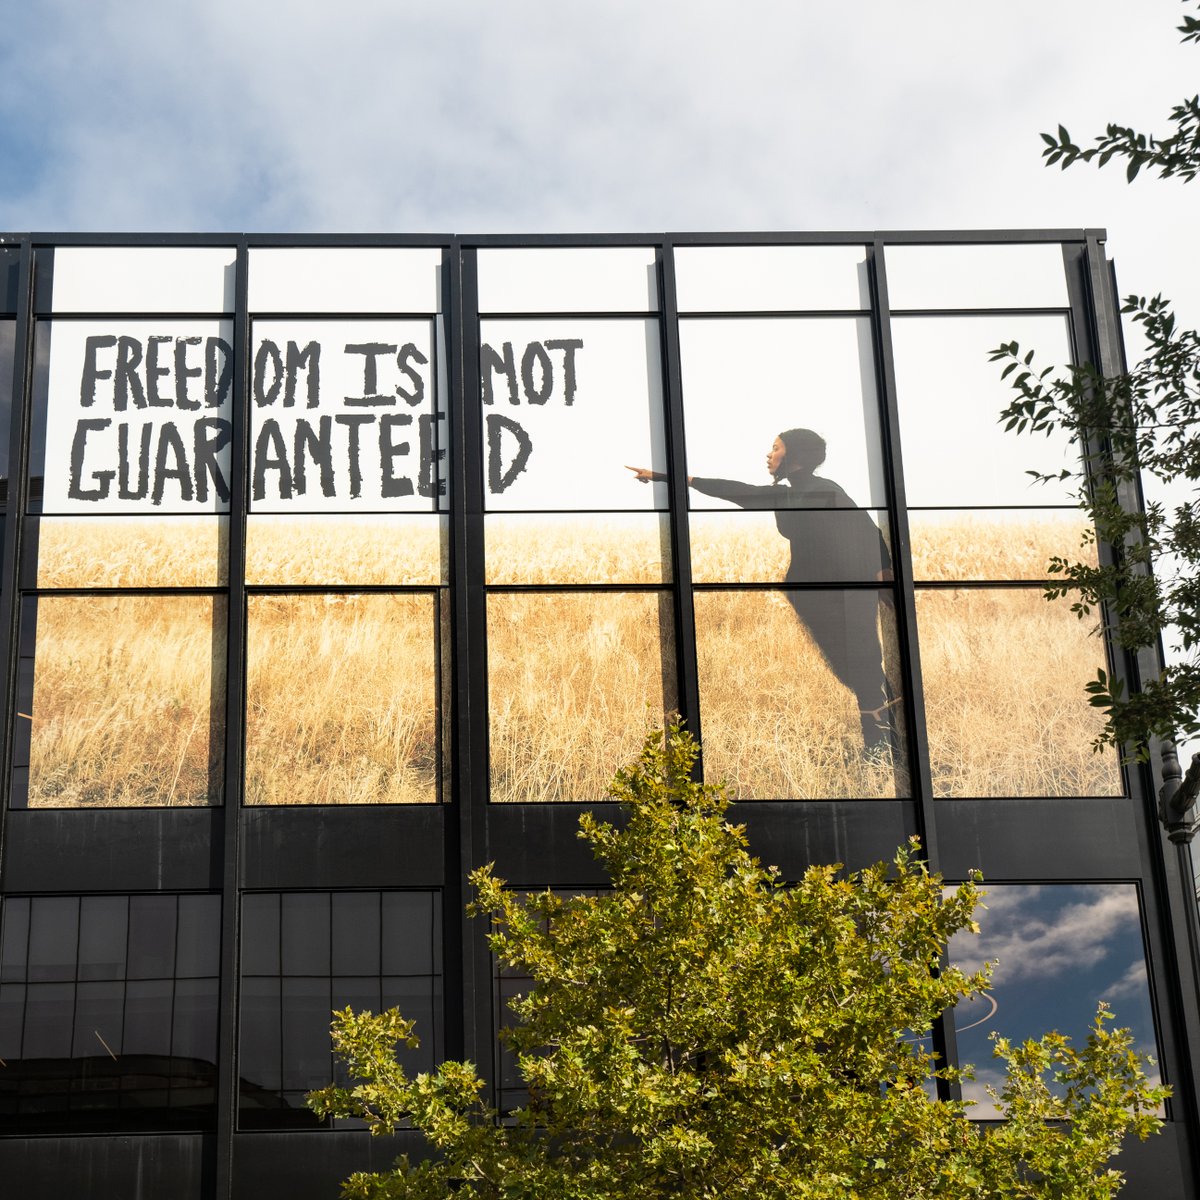 FREEDOM IS NOT GUARANTEED 📚 The freedom to read is essential to our democracy. It is continuously under attack. Marking the start of #BannedBooksWeek, artist @xavierasimmons' billboard 'Freedom is Not Guaranteed' was installed on the exterior of DC's MLK Library.